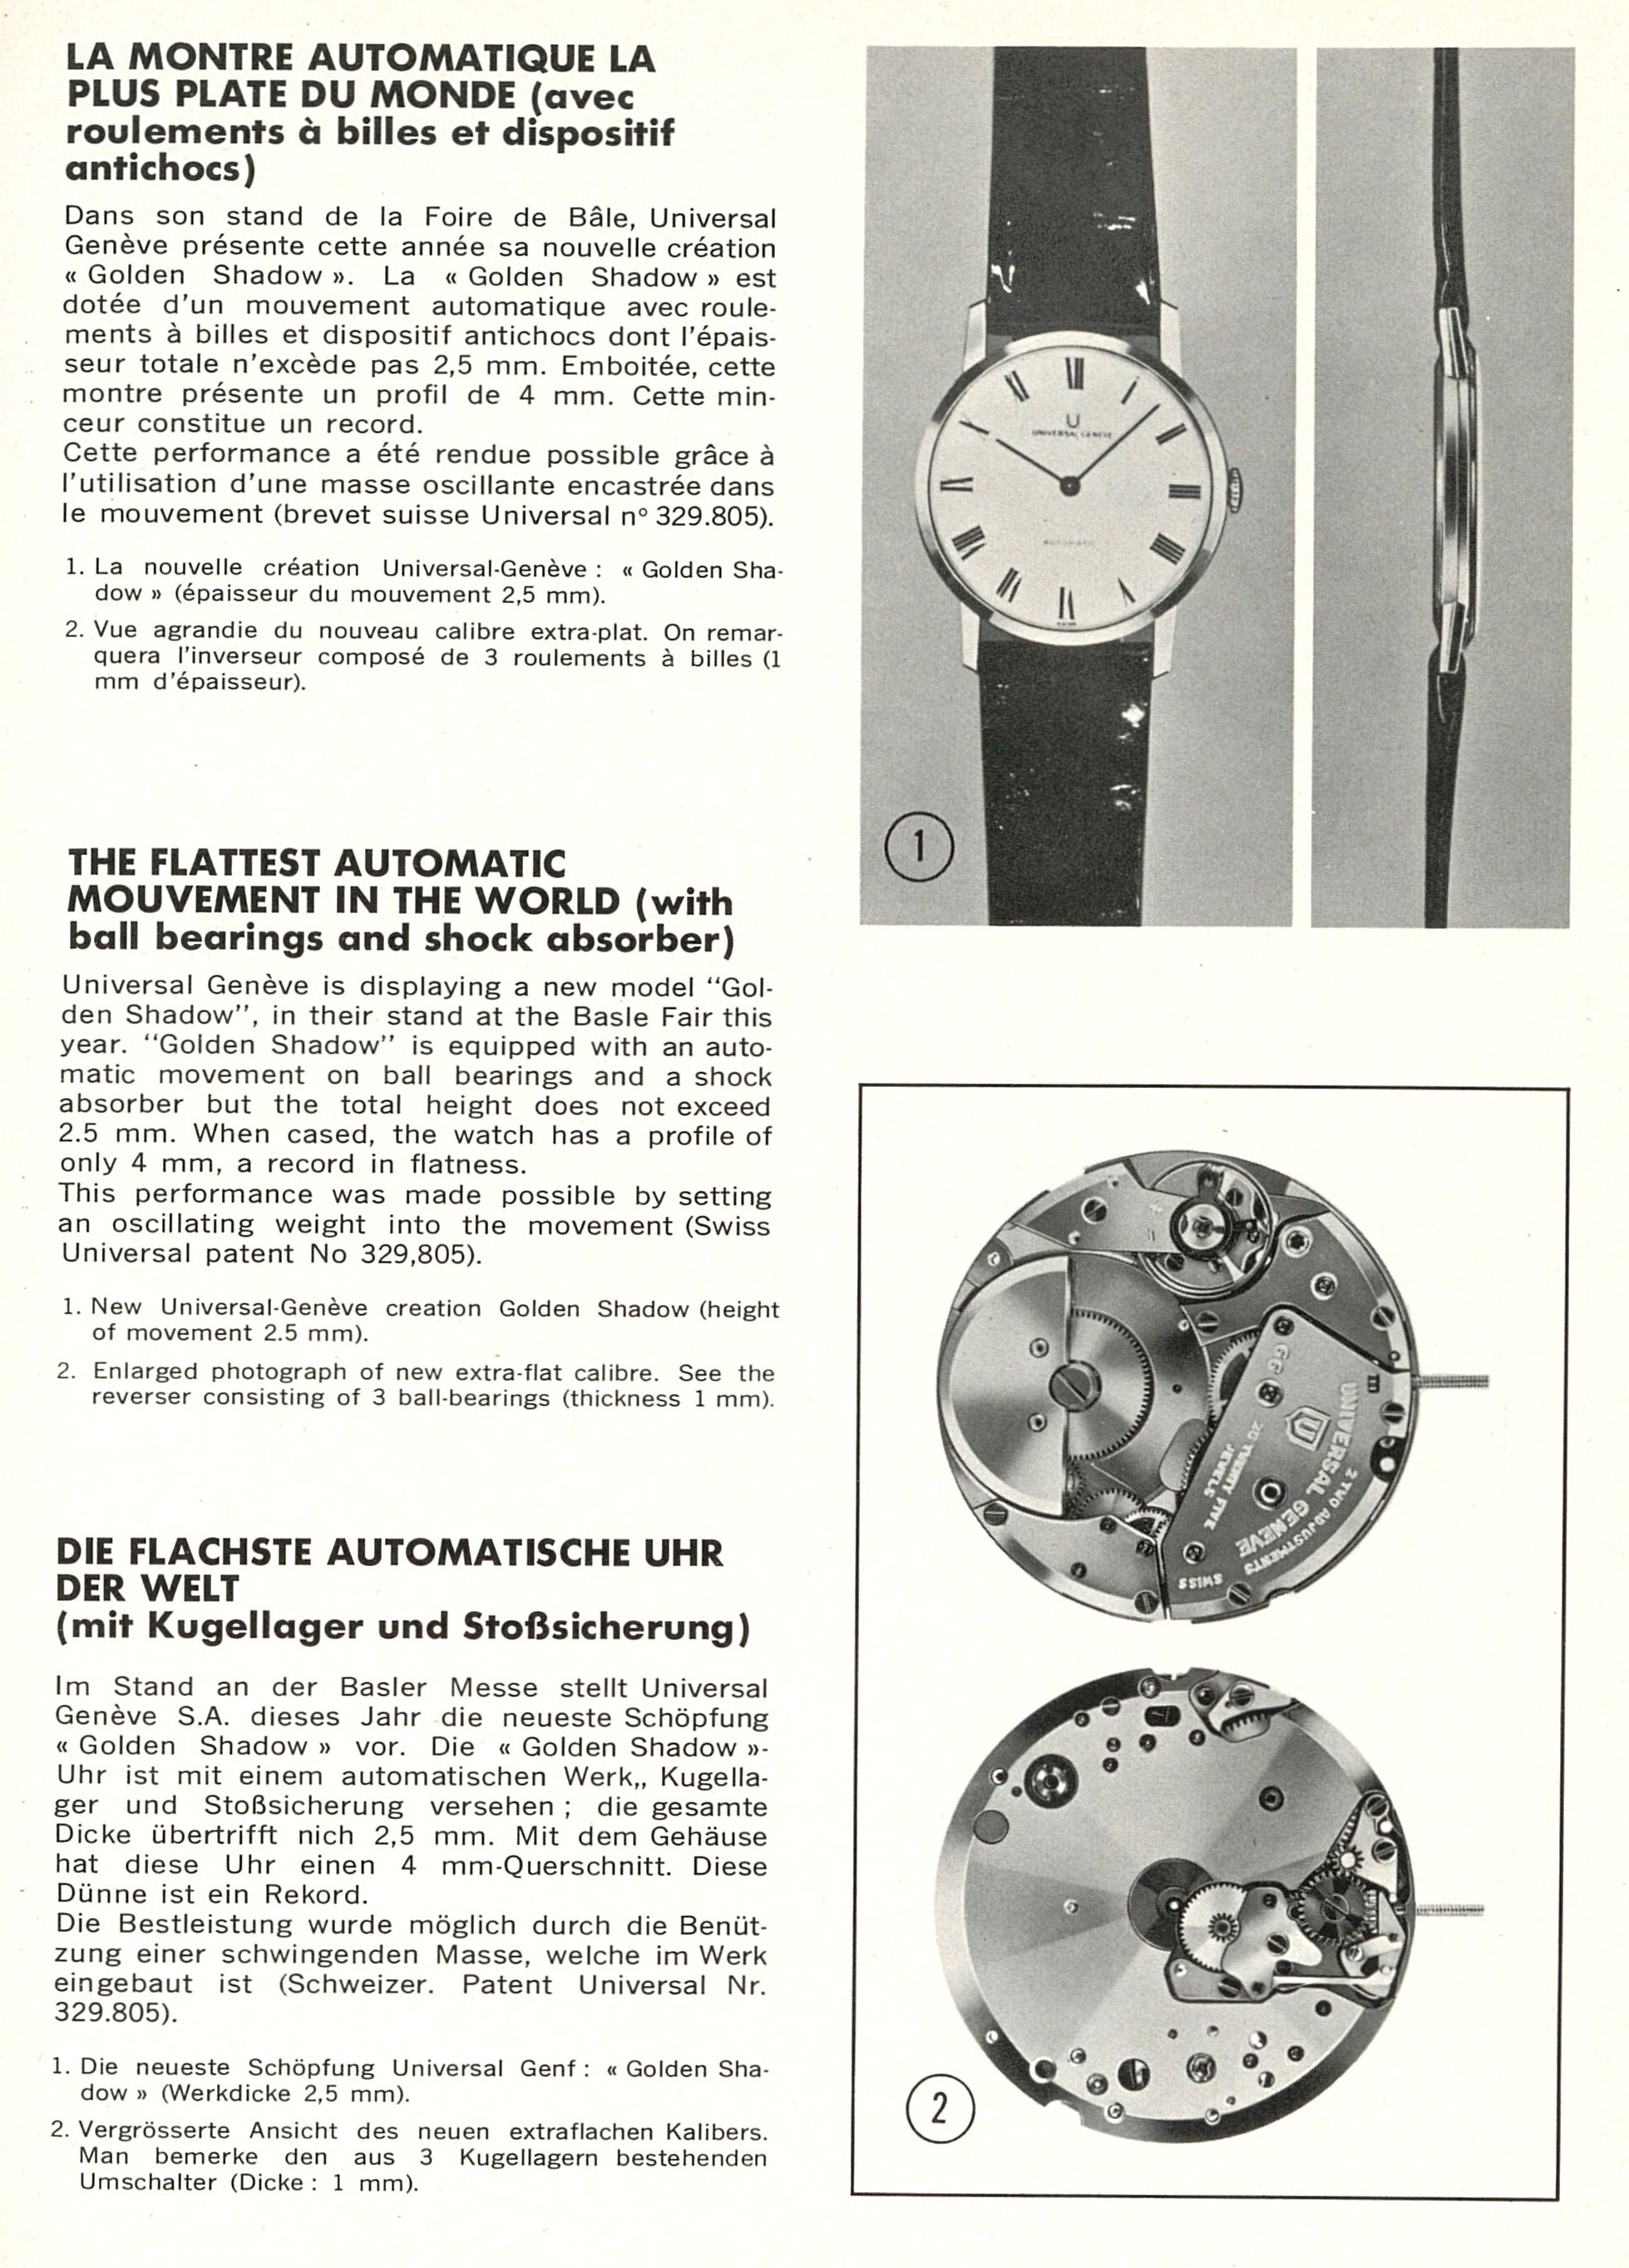 09_Universal_Geneve_advertising_for_the_Golden_Shadow_watch_published_in_Europa_Star_in_1966 semanalclasico